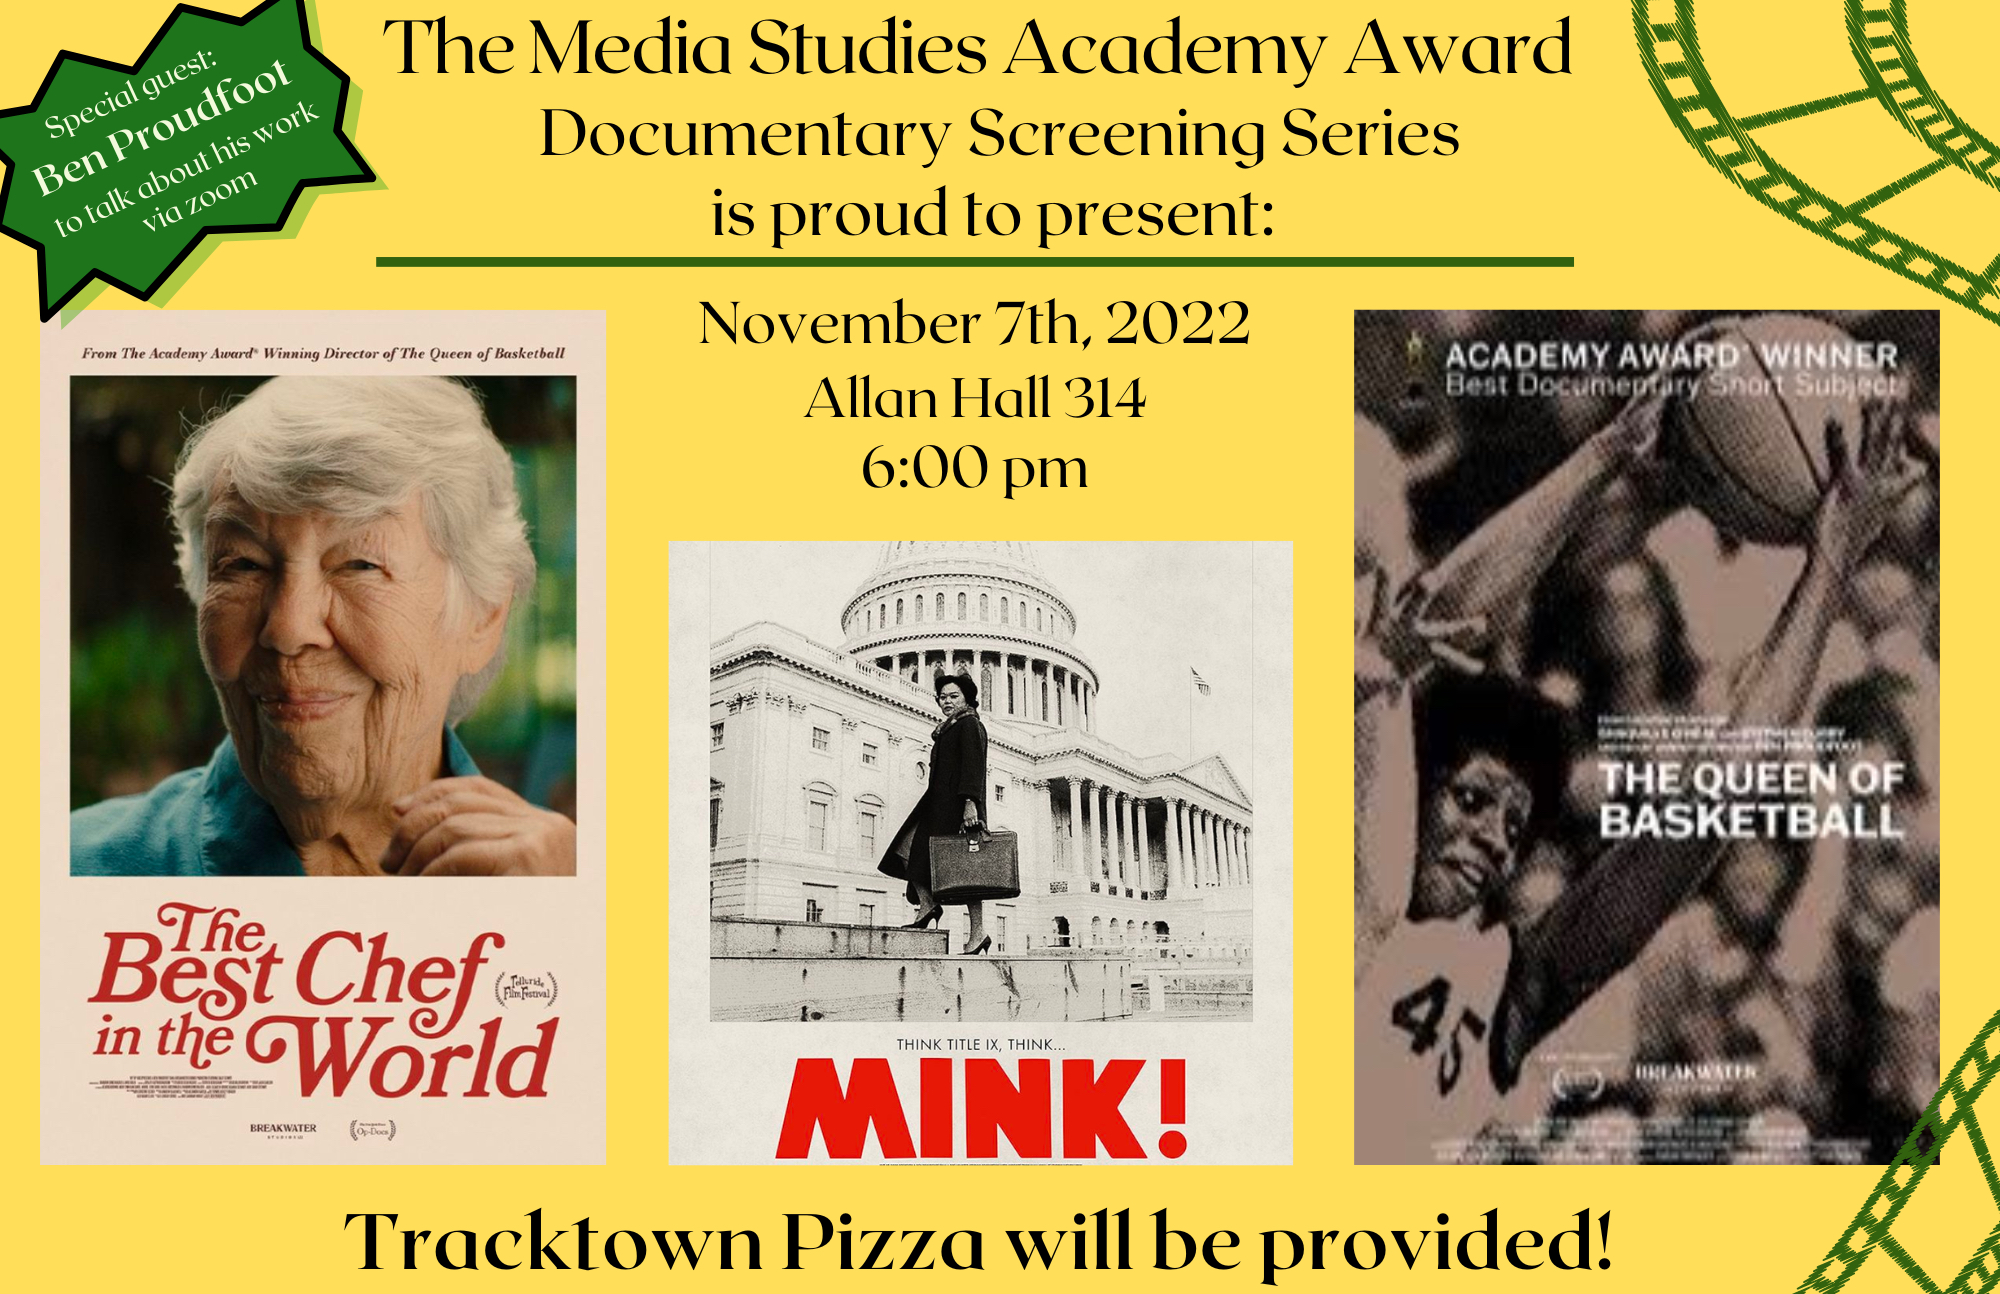 The Media Studies Academy Award Documentary Screening Series is proud to present: The Best Chef in the World, Think Title IX. Think...Mink!, and The Queen of Basketball with special guest Ben Proudfoot who will talk about his work via Zoom. Tracktown Pizz